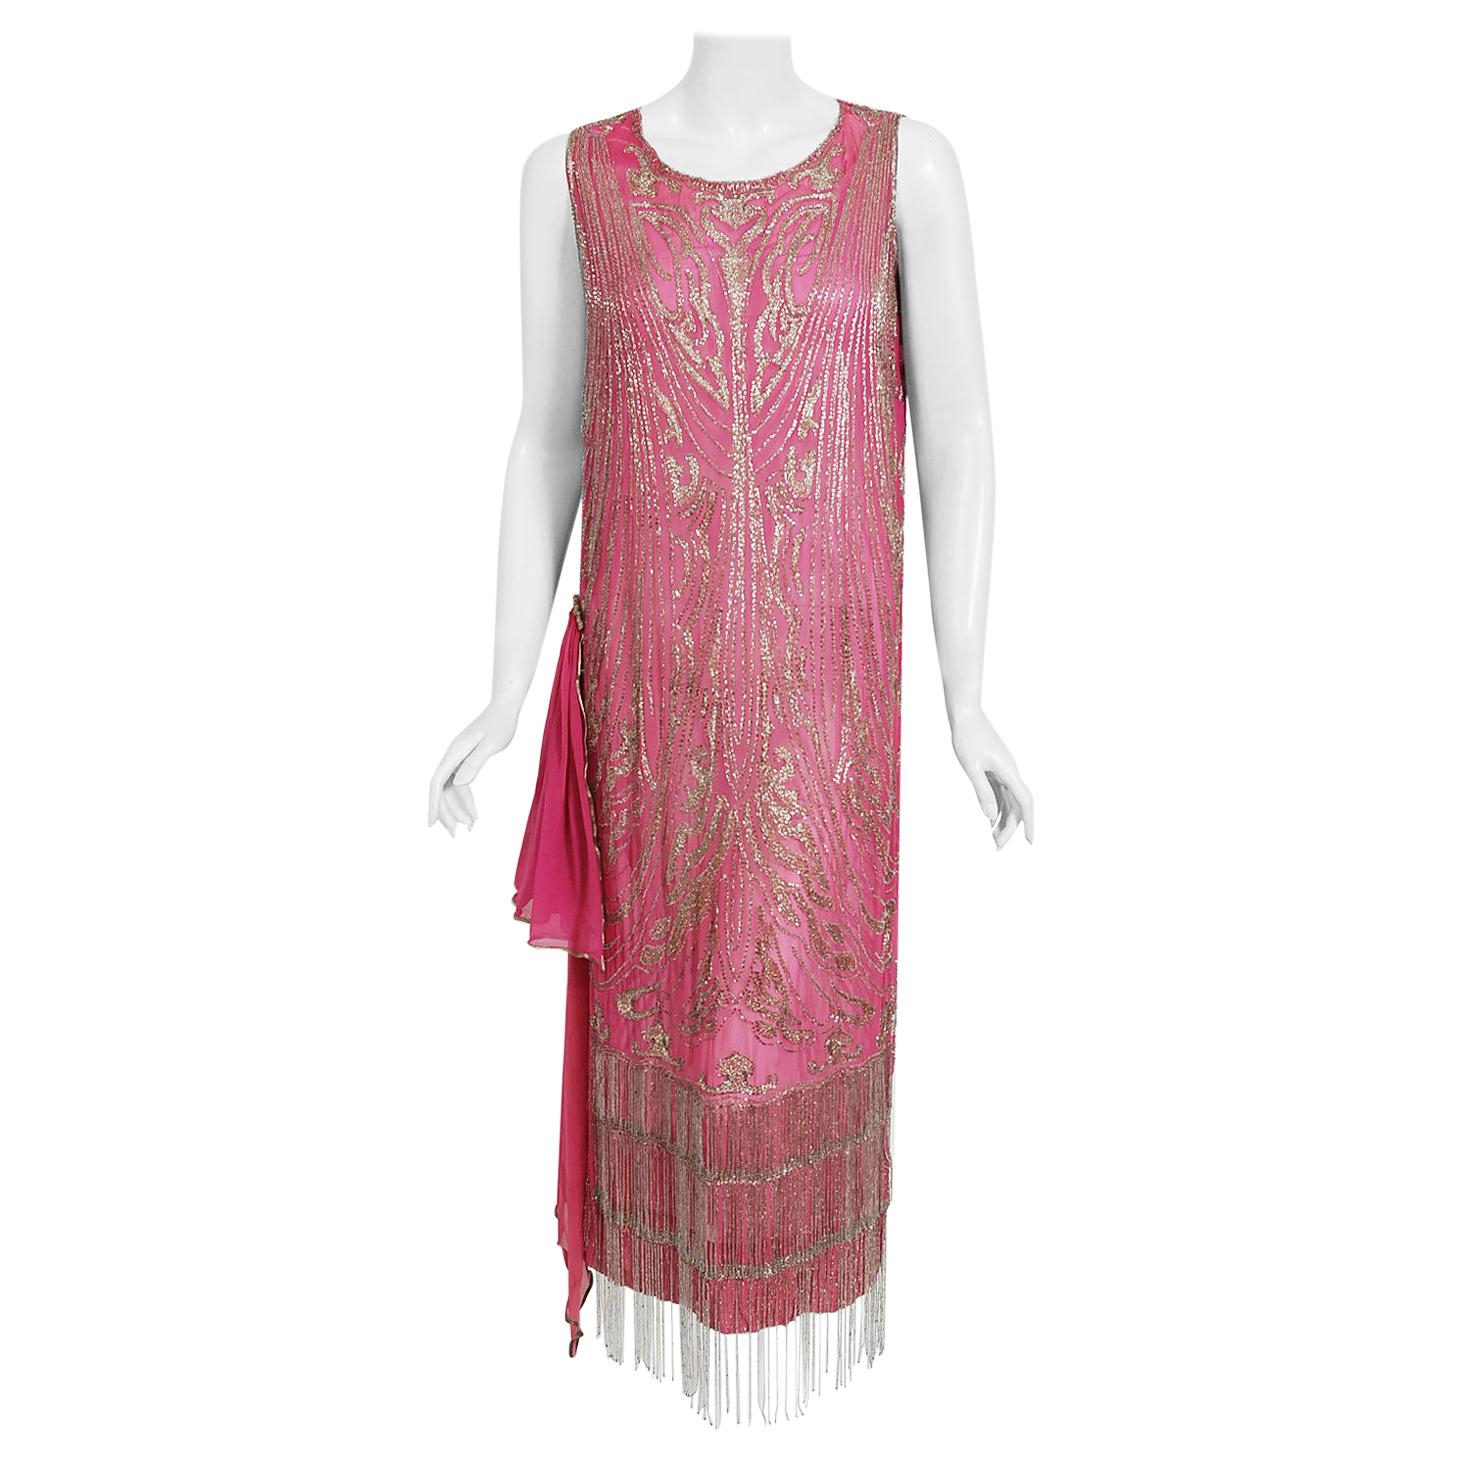 Vintage 1920's French Couture Fuchsia Pink Beaded Embroidered Silk Flapper Dress